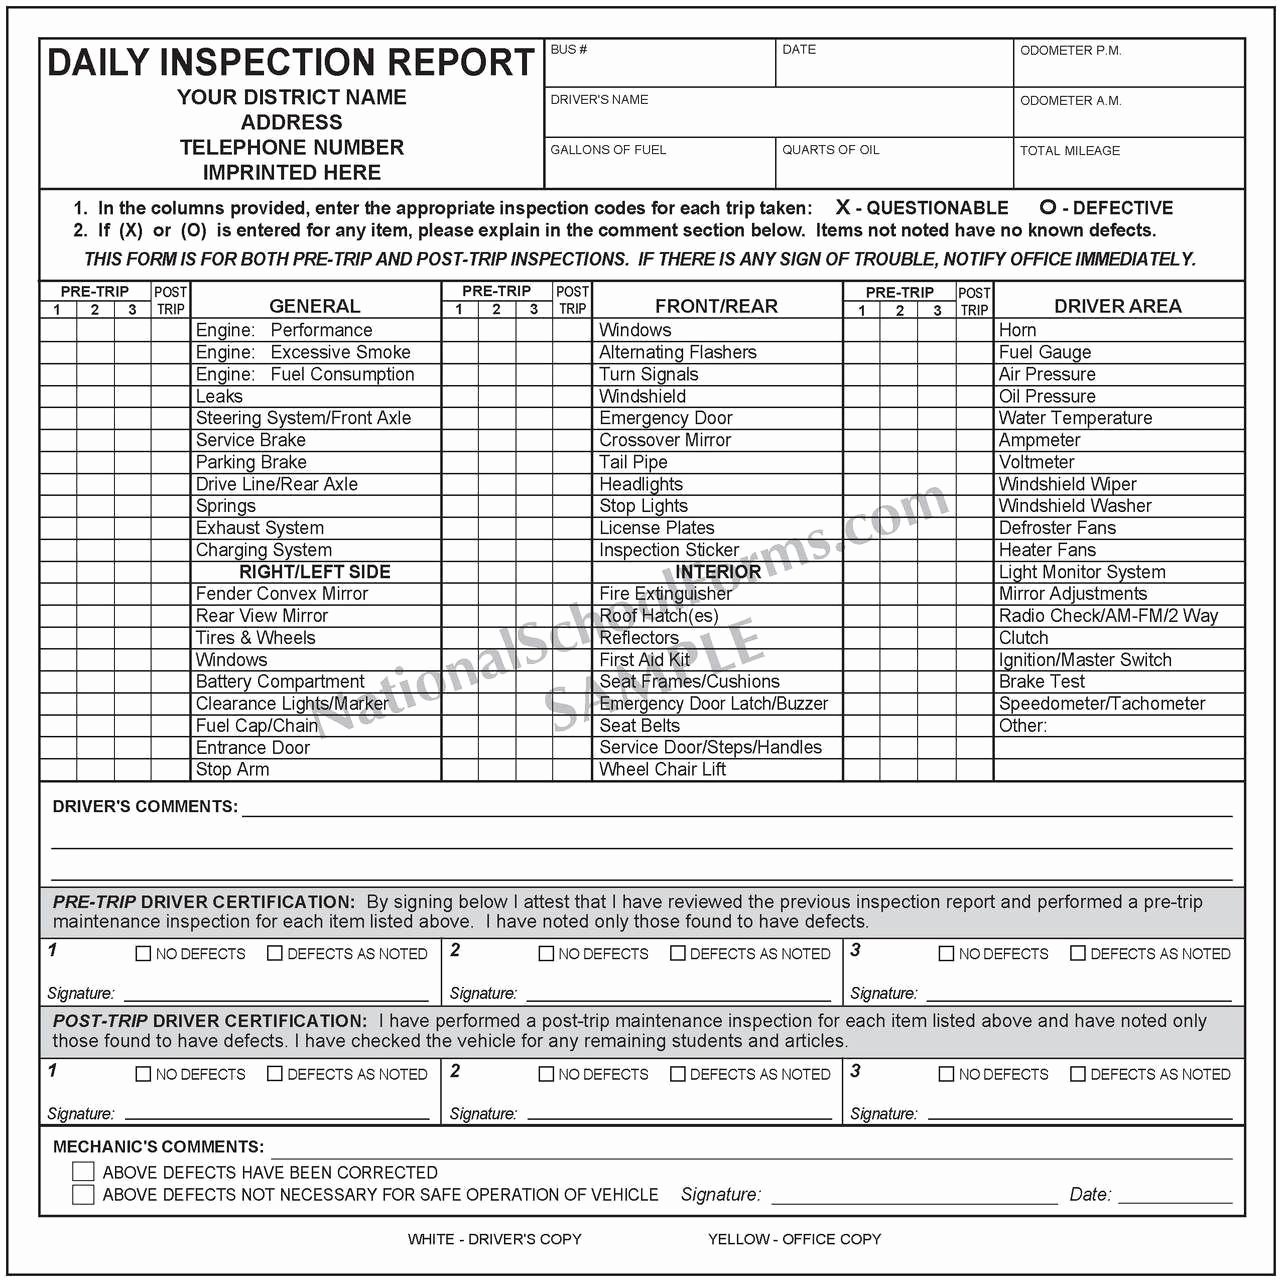 Daily Inspection Report with Pre and Post Trip